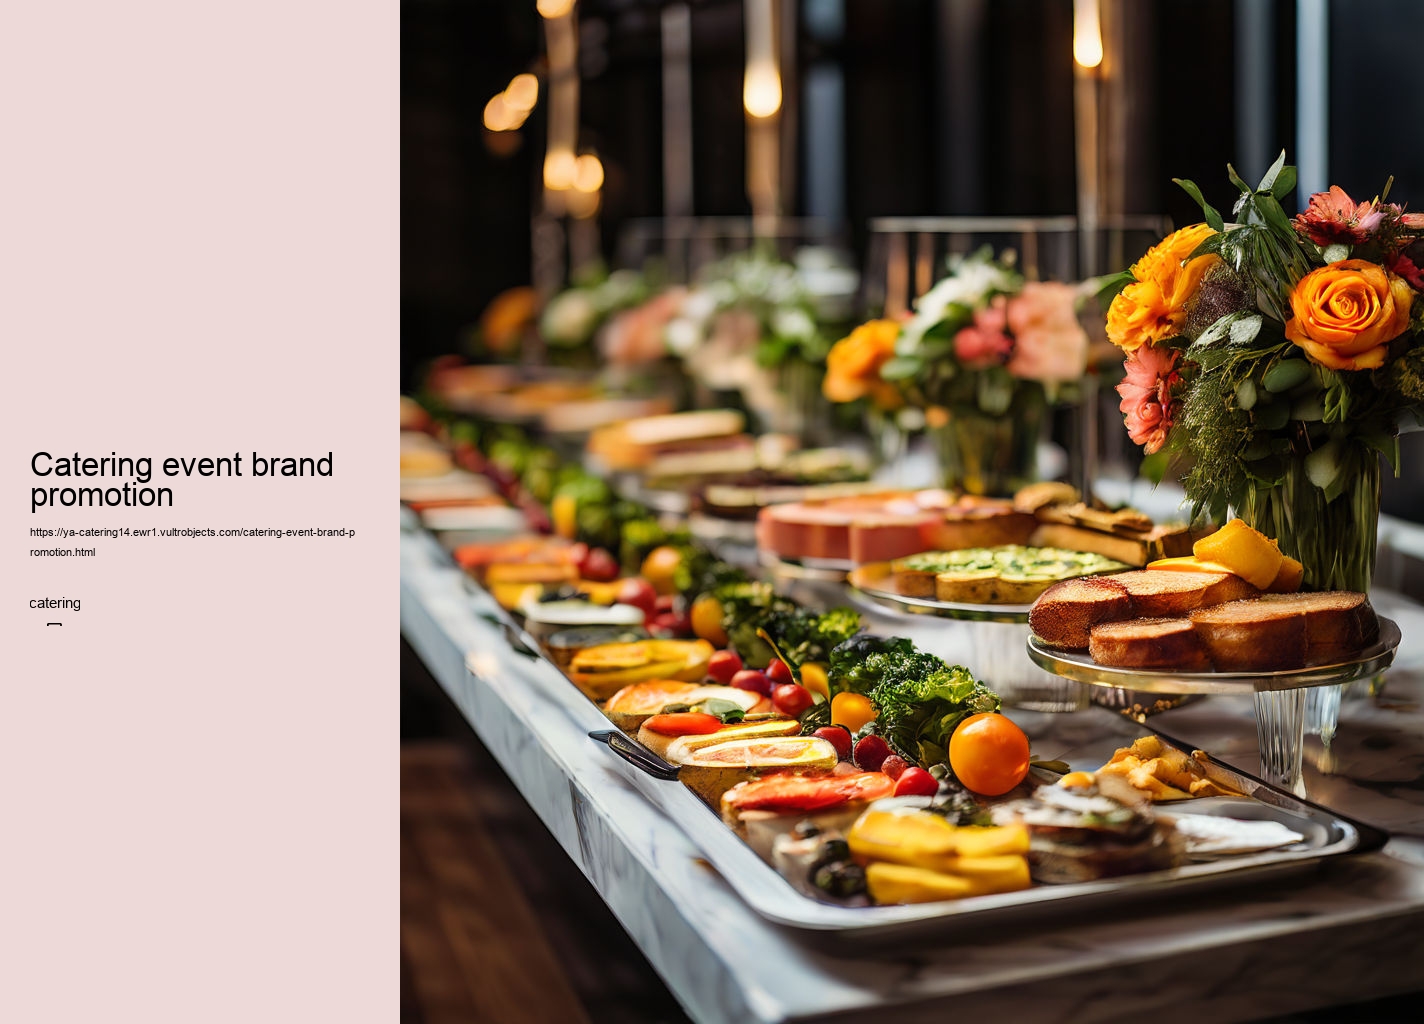 Catering event brand promotion